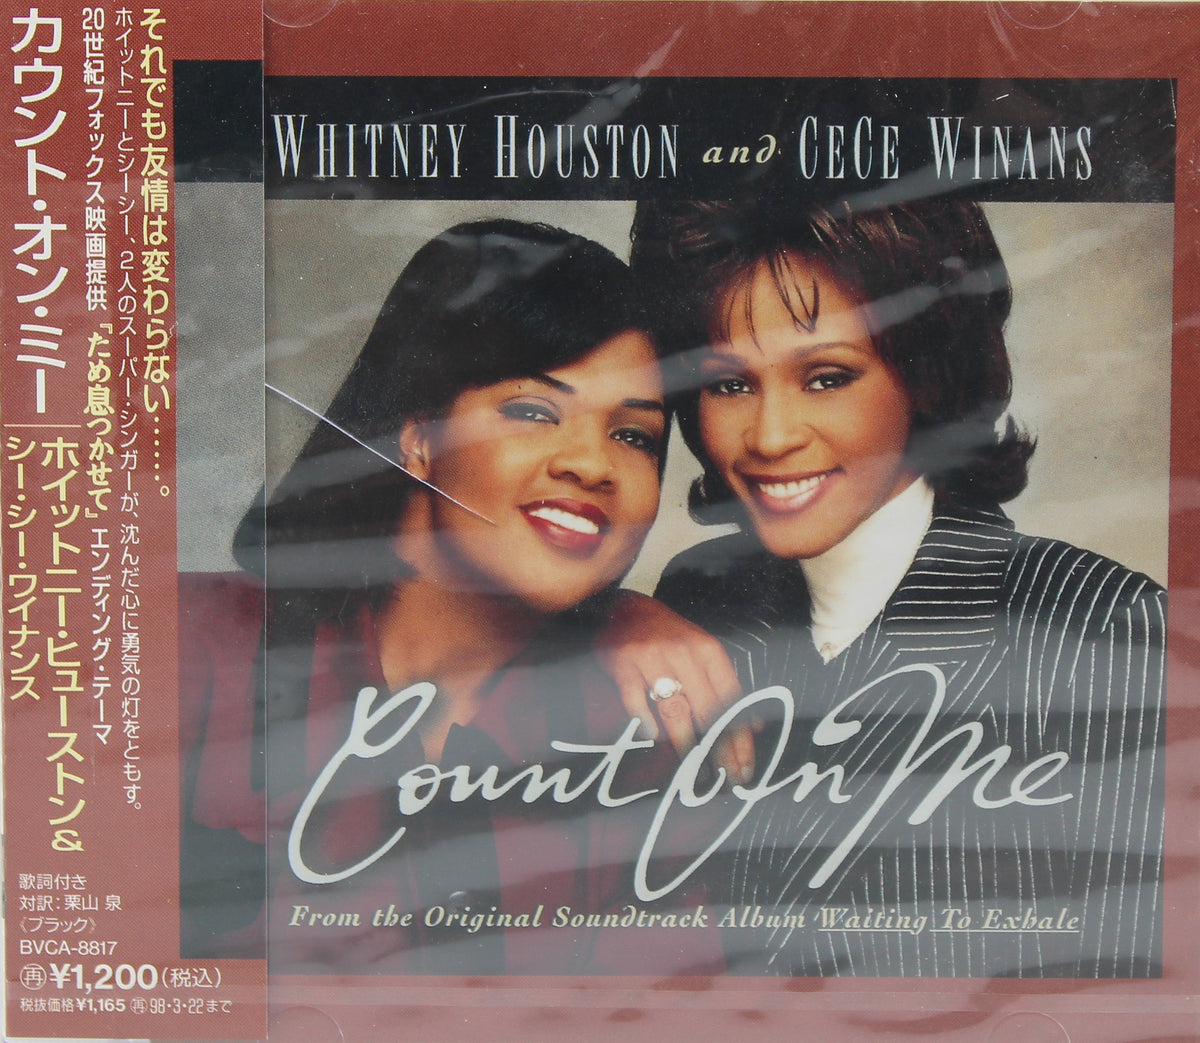 Whitney Houston And CeCe Winans – Count On Me, CD, Maxi-Single, Japan 1996